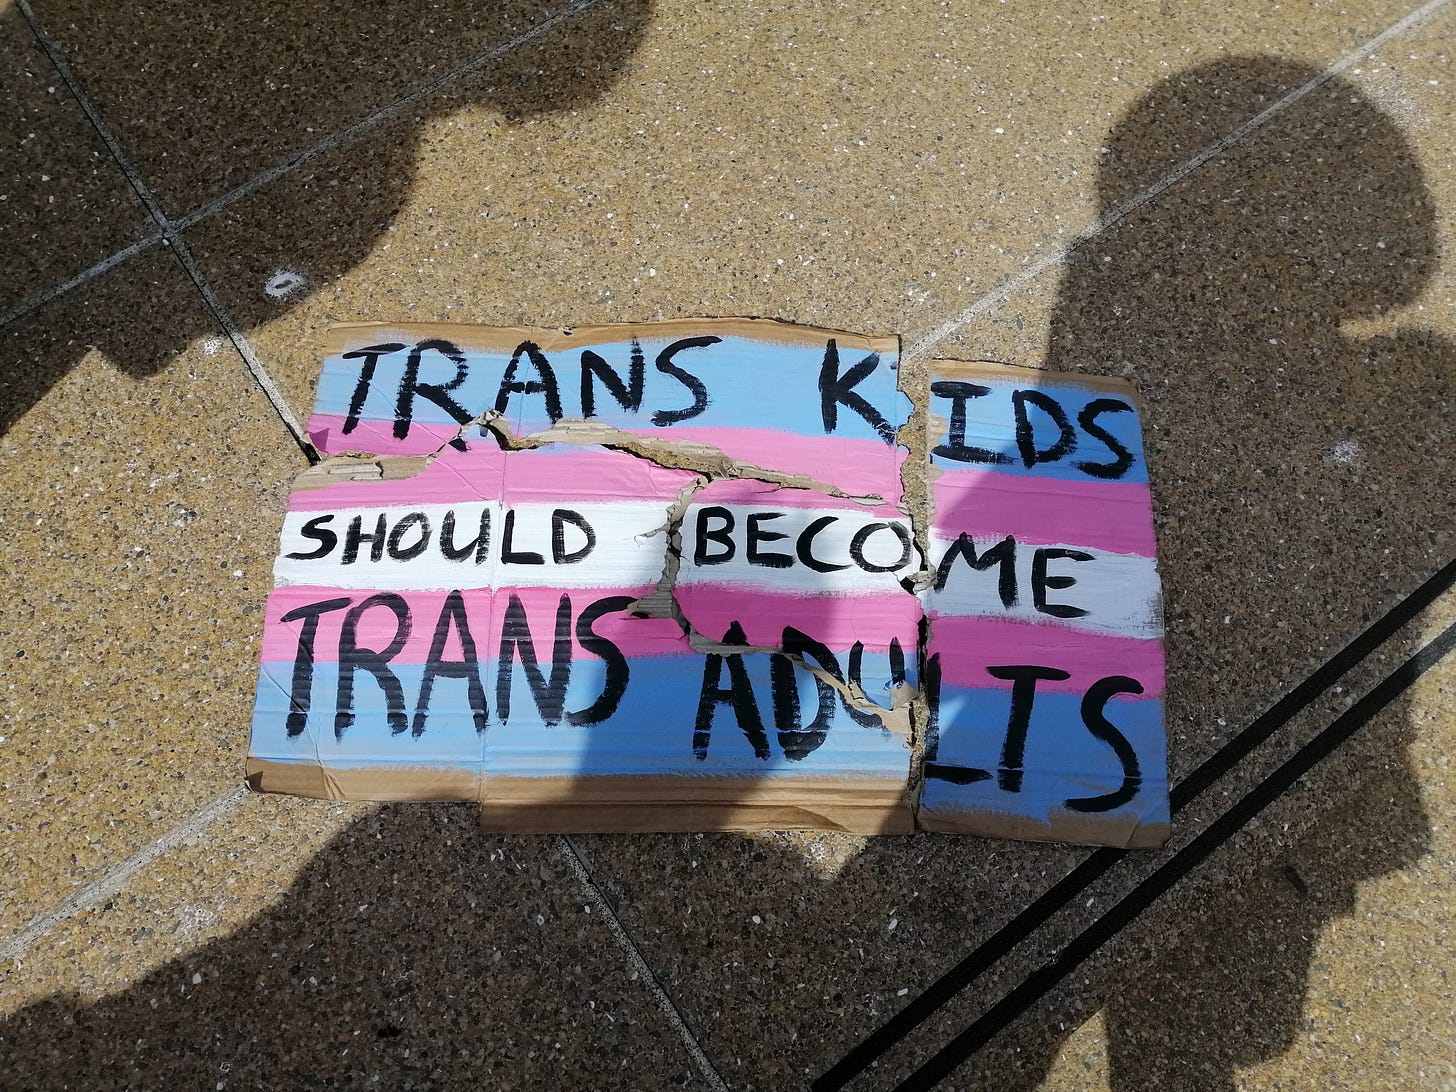 Sign on the ground that is a trans flag with the text Trans kids should become trans adults" the sign is ripped into four pieces